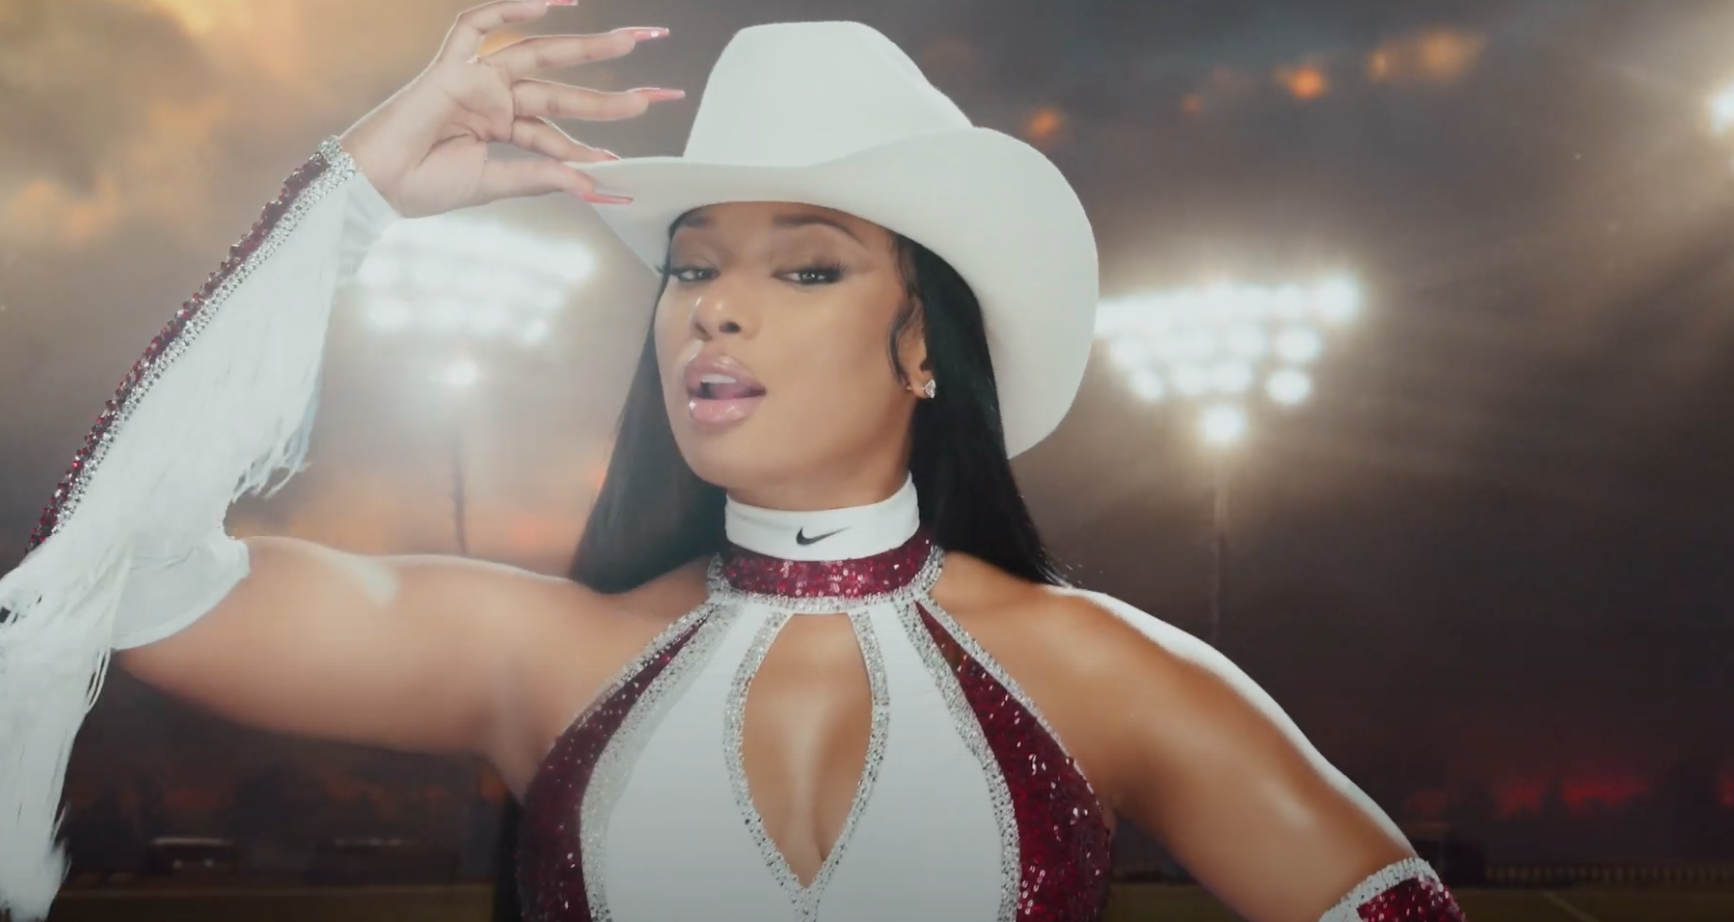 Megan Thee Stallion Redefines What It Means To Be An Athlete In New Nike Campaign